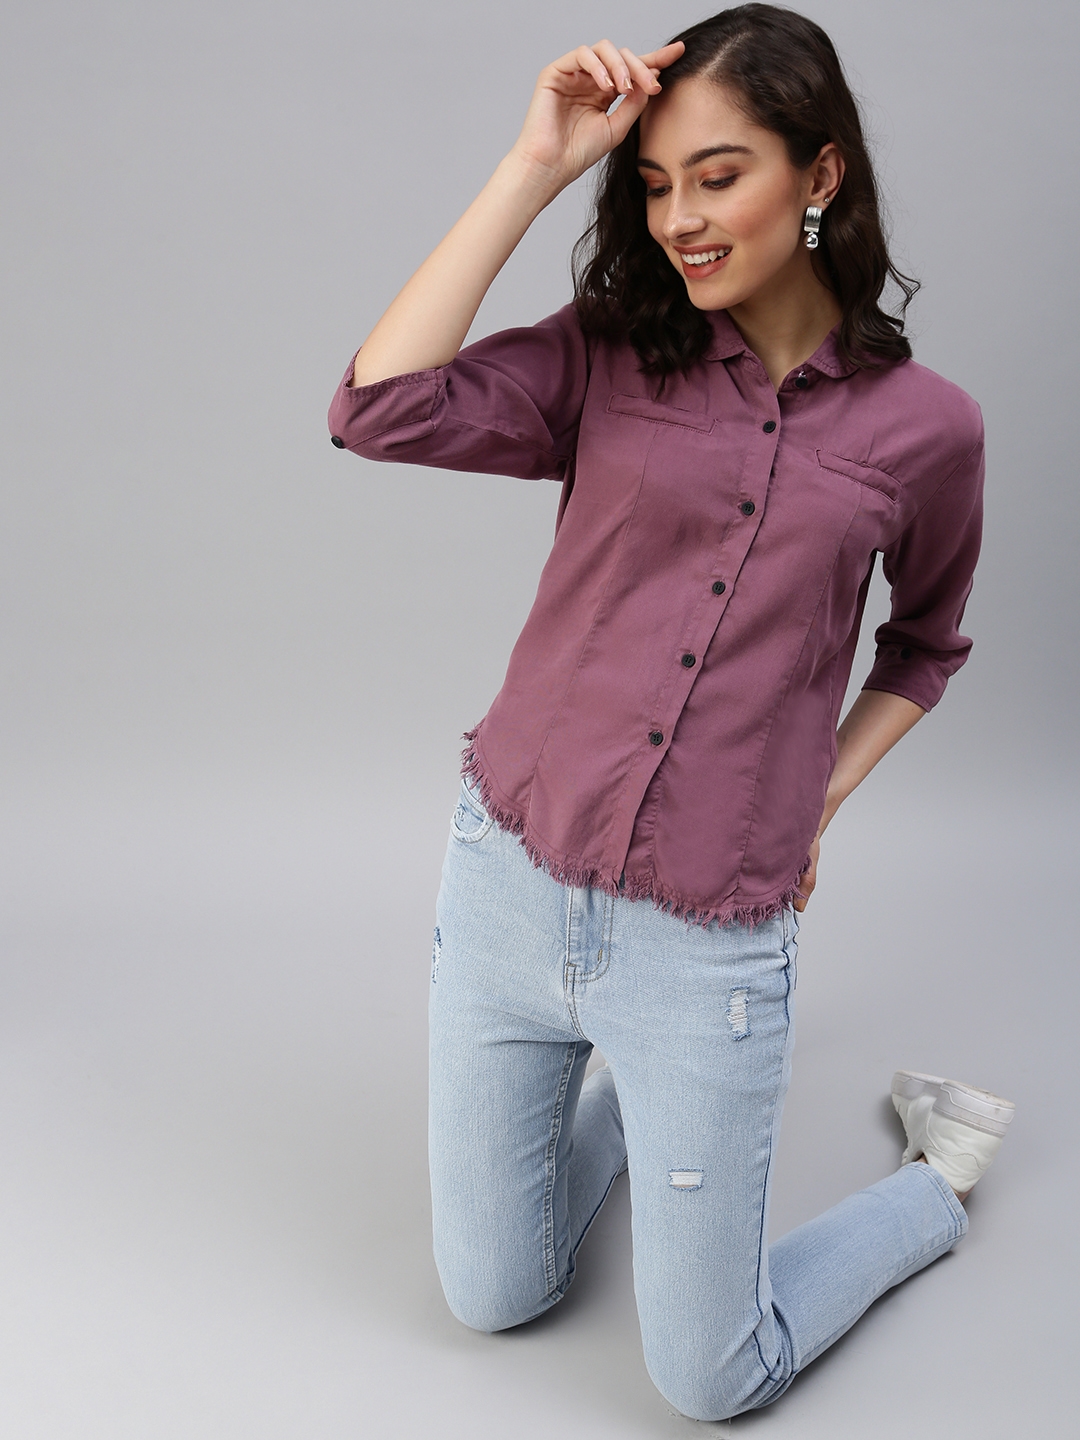 Women's Grey Cotton Solid Casual Shirts